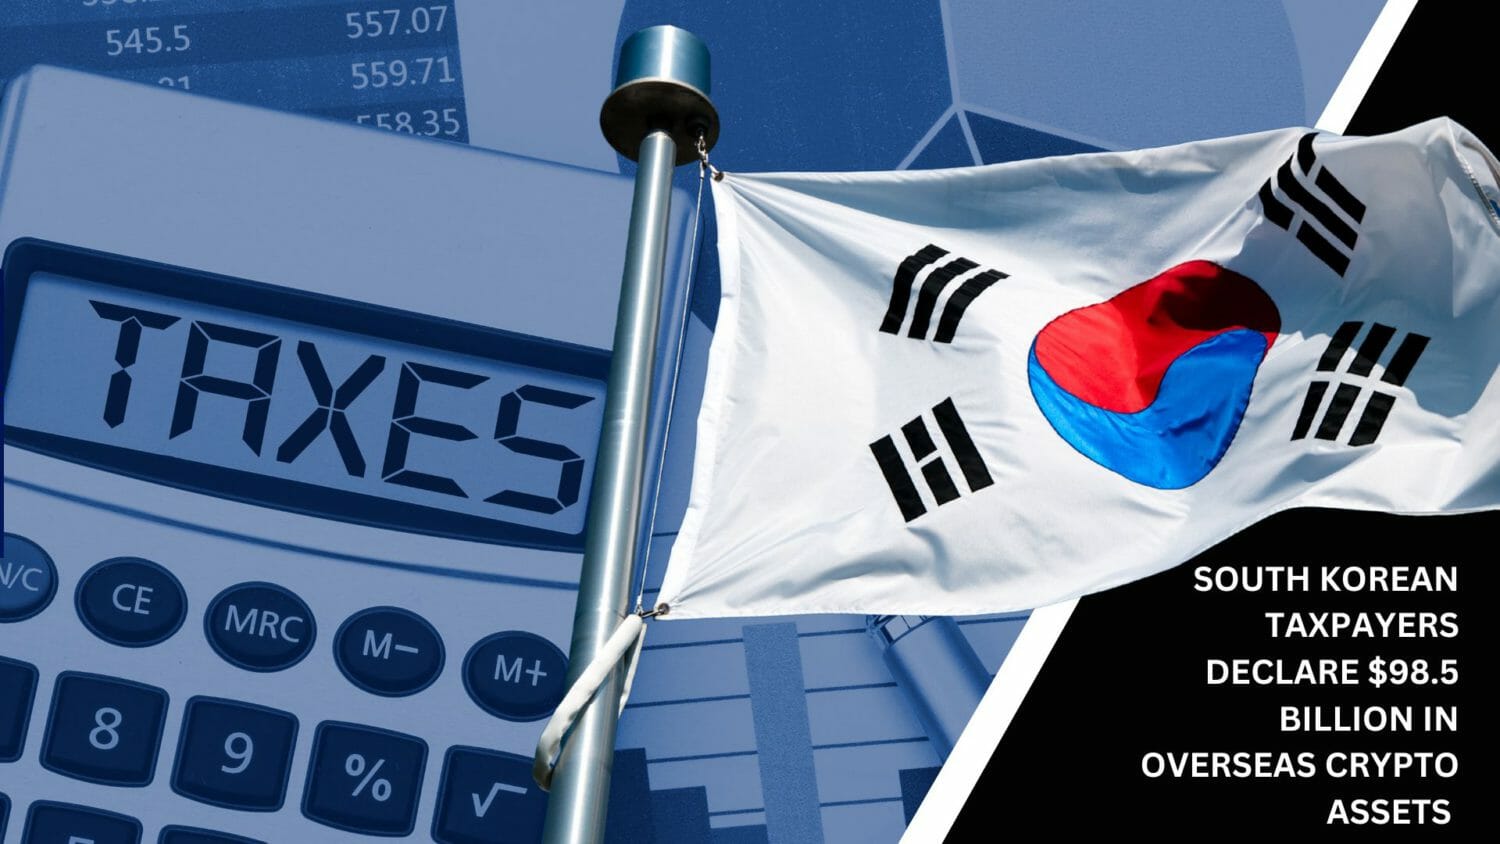 South Korean Taxpayers Declare $98.5 Billion In Overseas Crypto Assets 